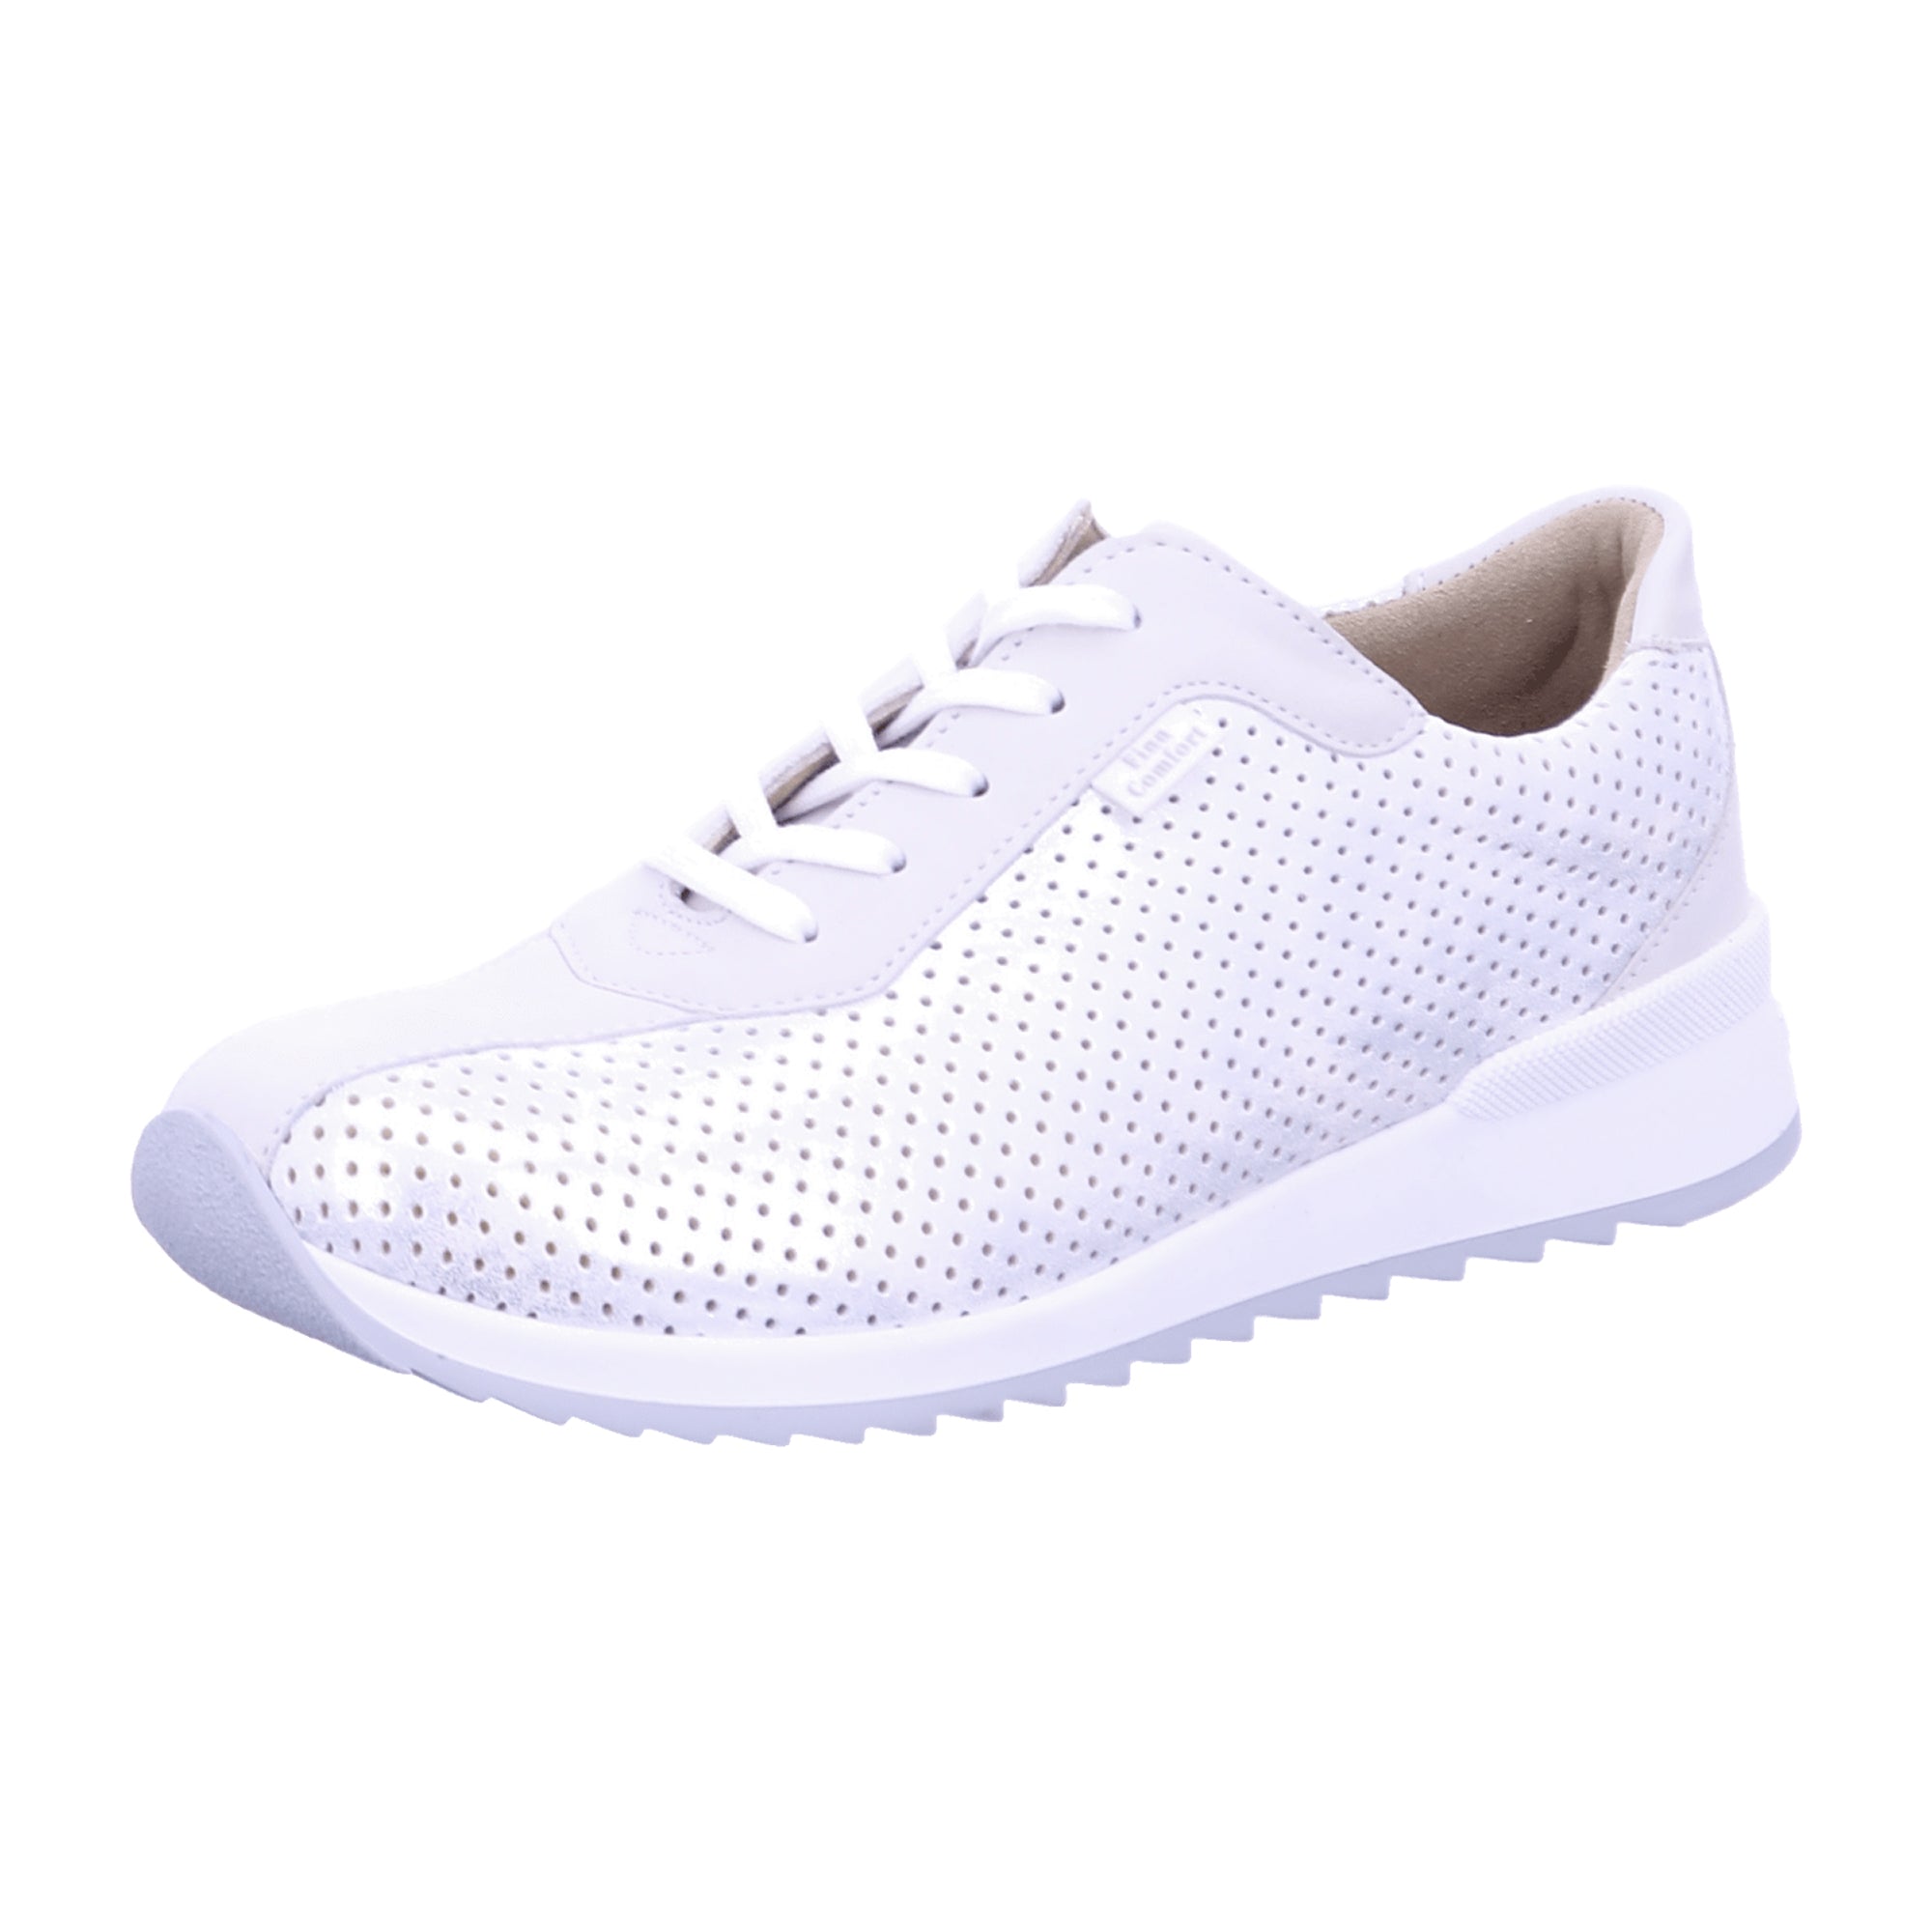 Finn Comfort Melk Women's Comfortable White Shoes - Stylish and Durable